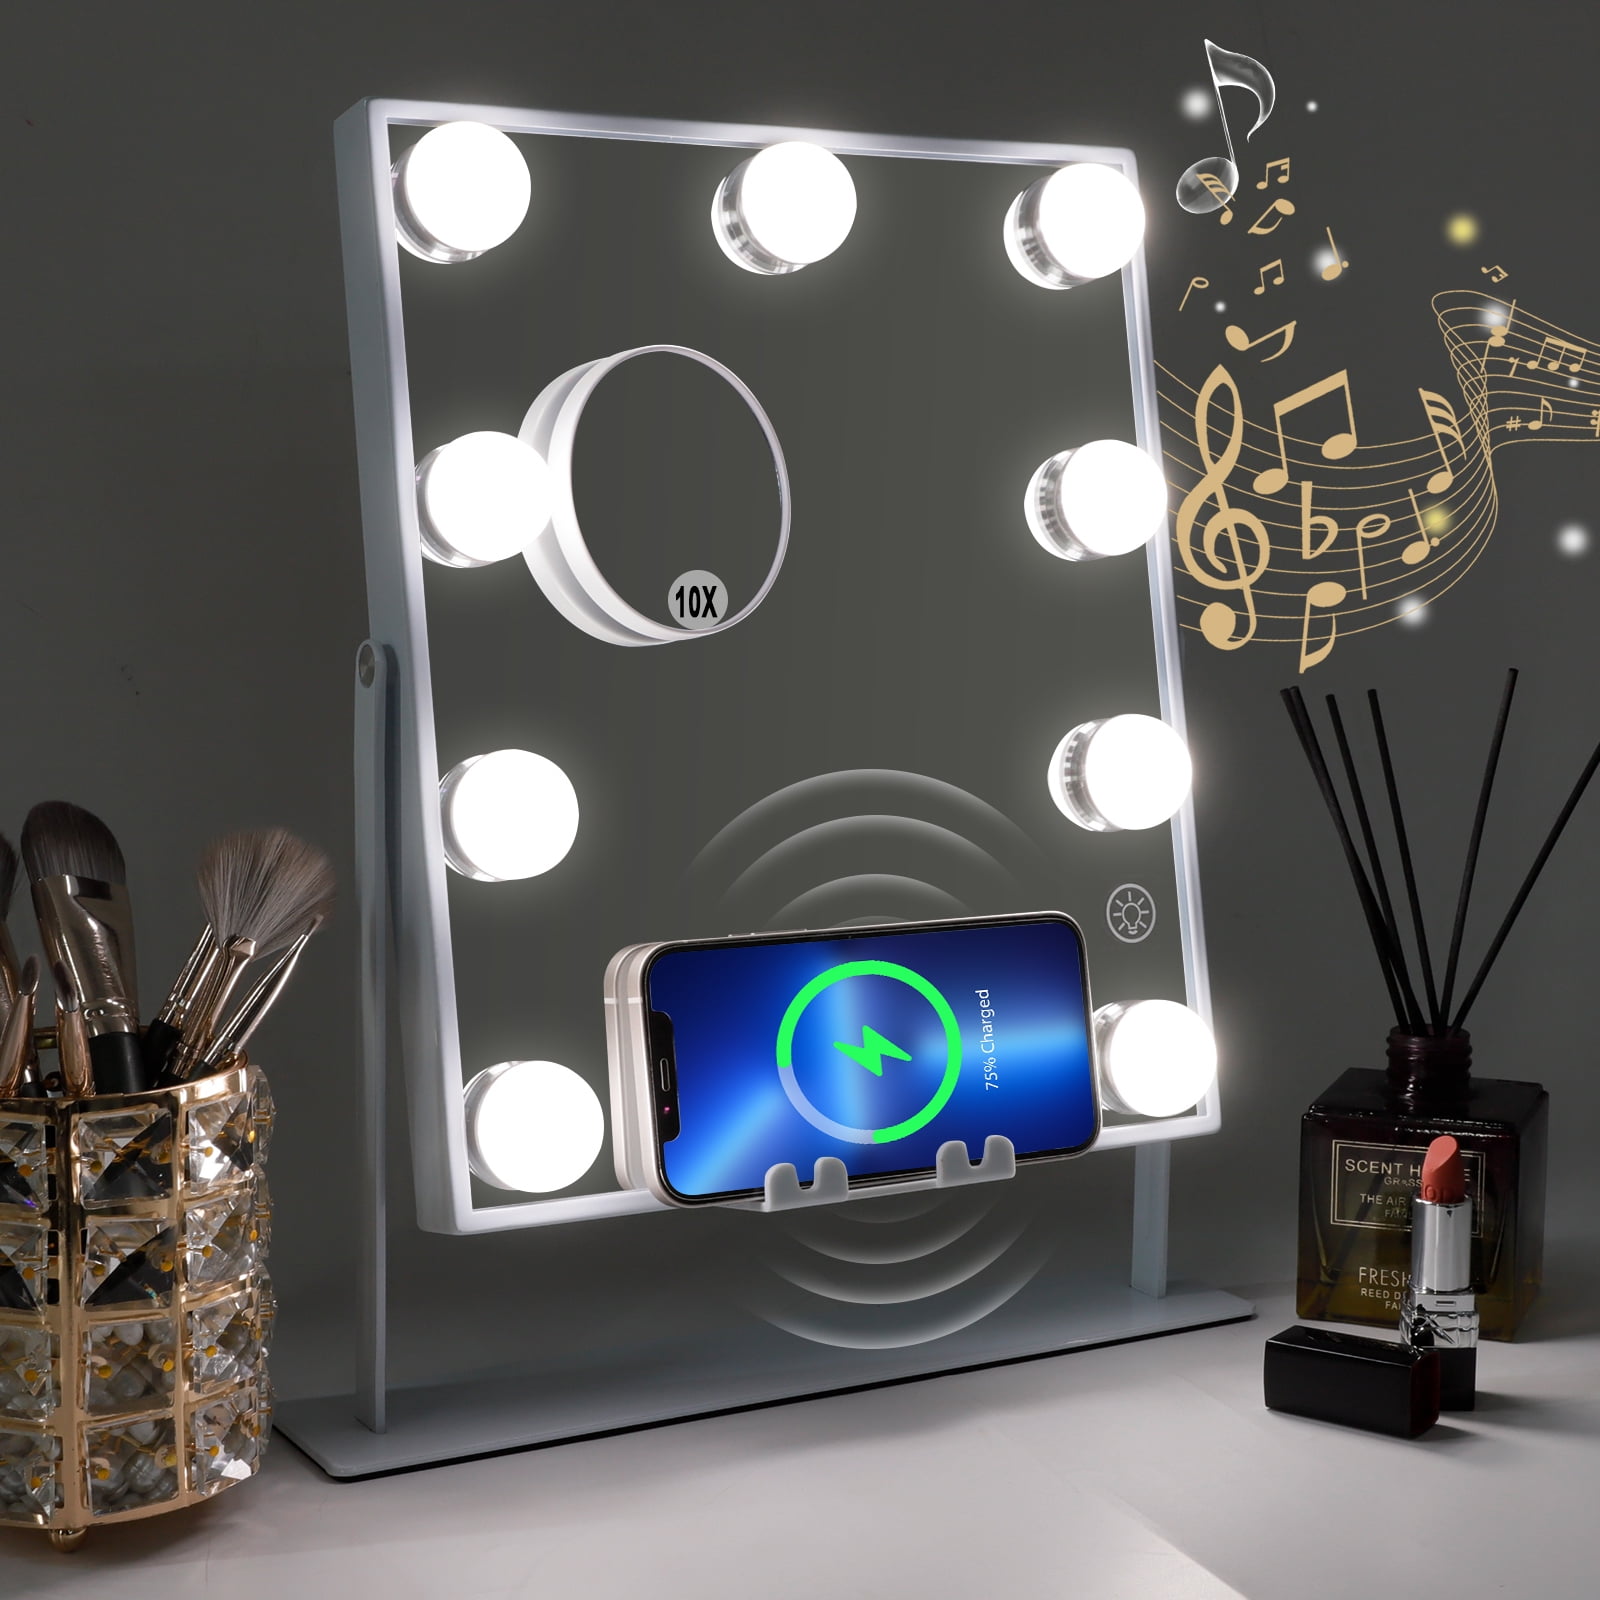 Fenair Bluetooth Hollywood Vanity Mirror with Lights Wireless Charging Tabletop Metal White, Size: 9.84 x 11.81